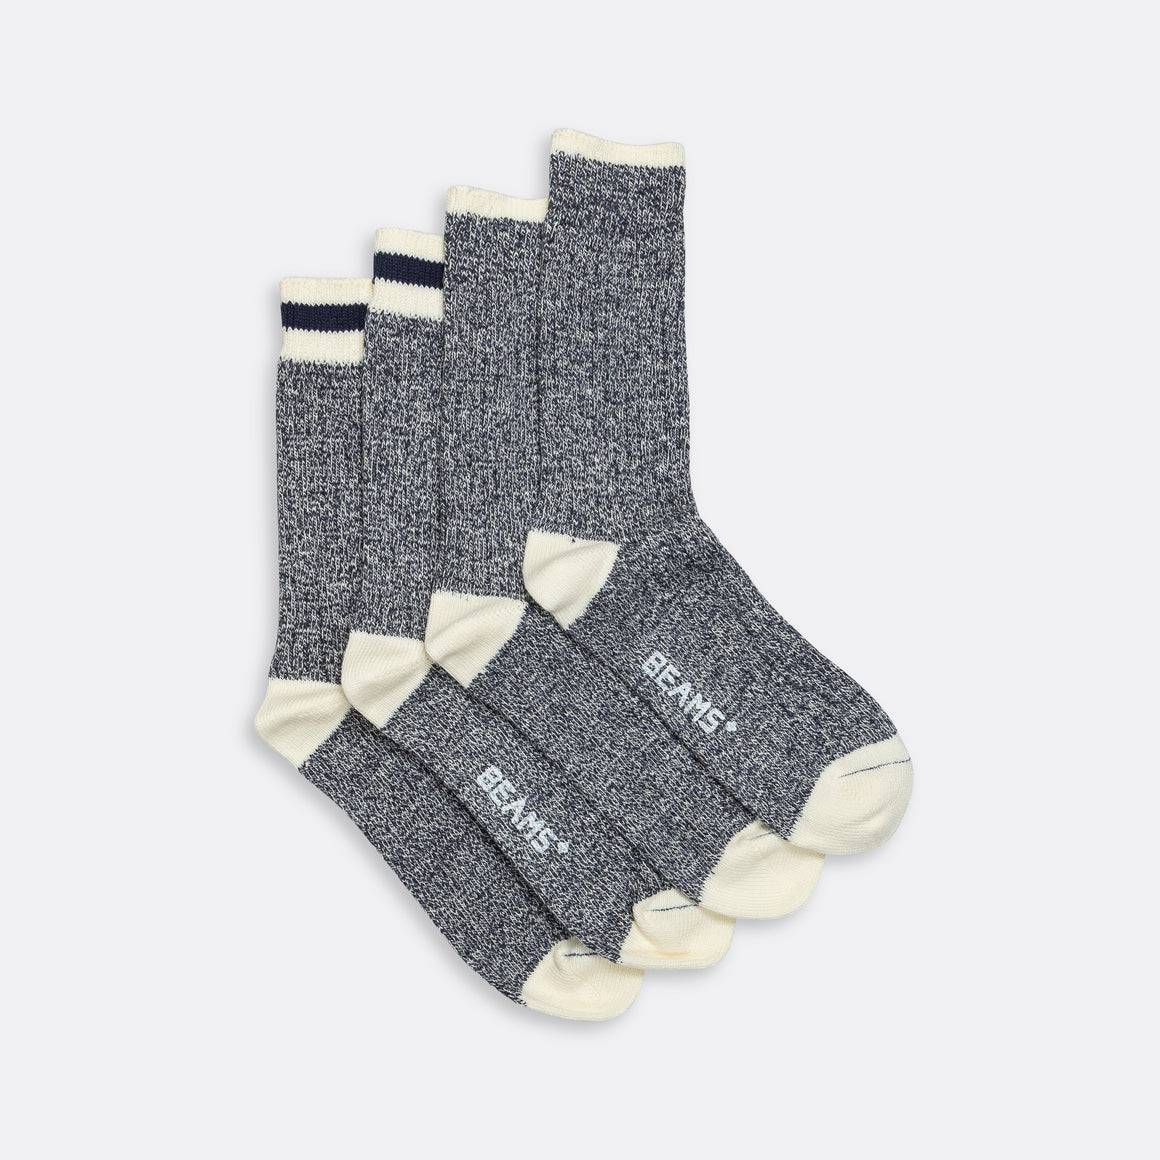 Beams Plus - Rag Socks - New Navy - UP THERE